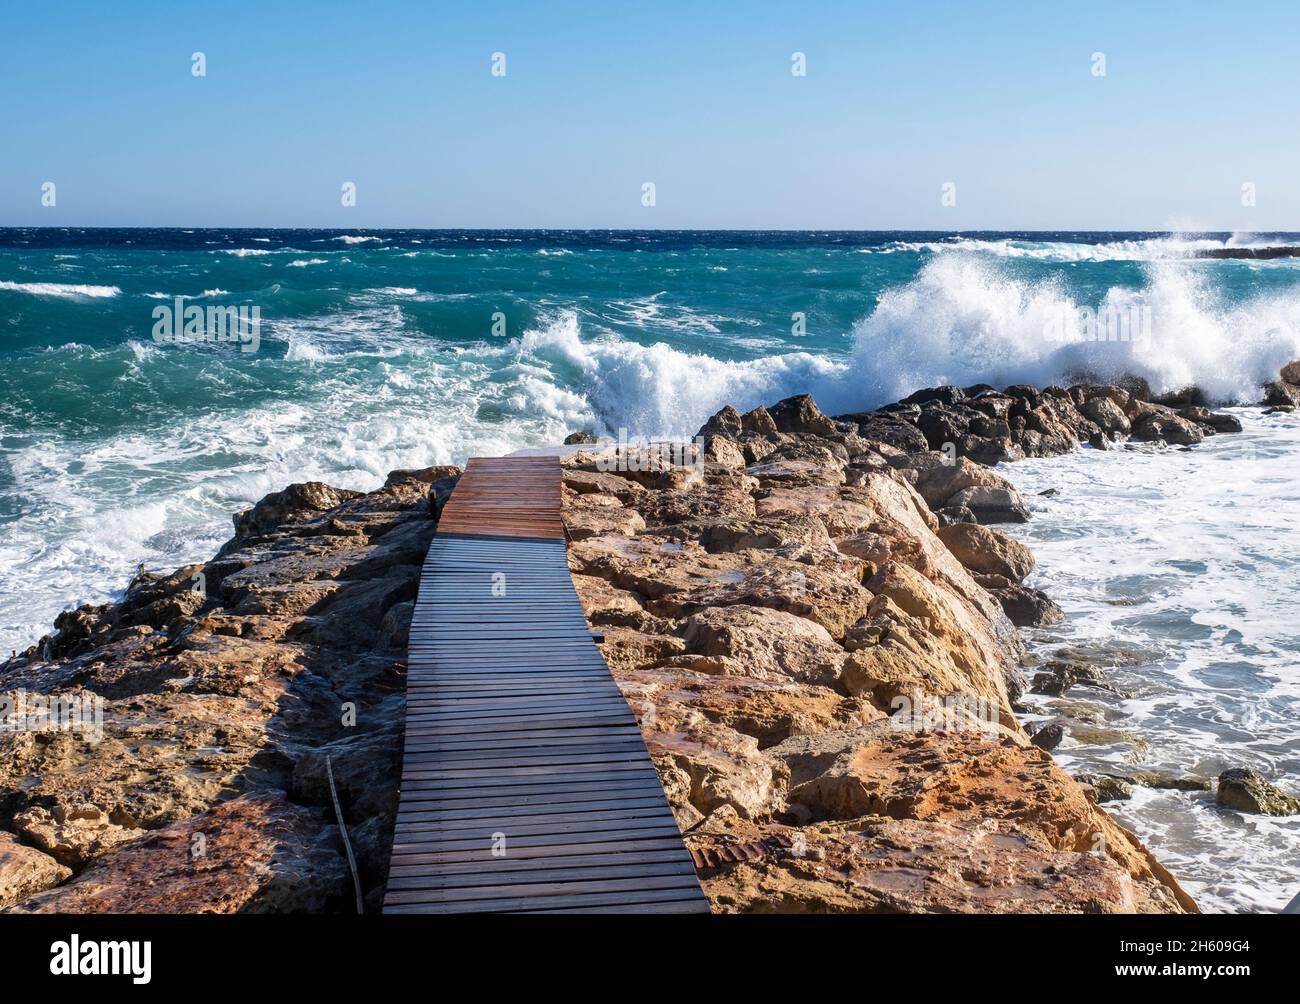 Boardwalk on a stormy day at the Green Bay Water Sports centre, Protaras, Cyprus Stock Photo